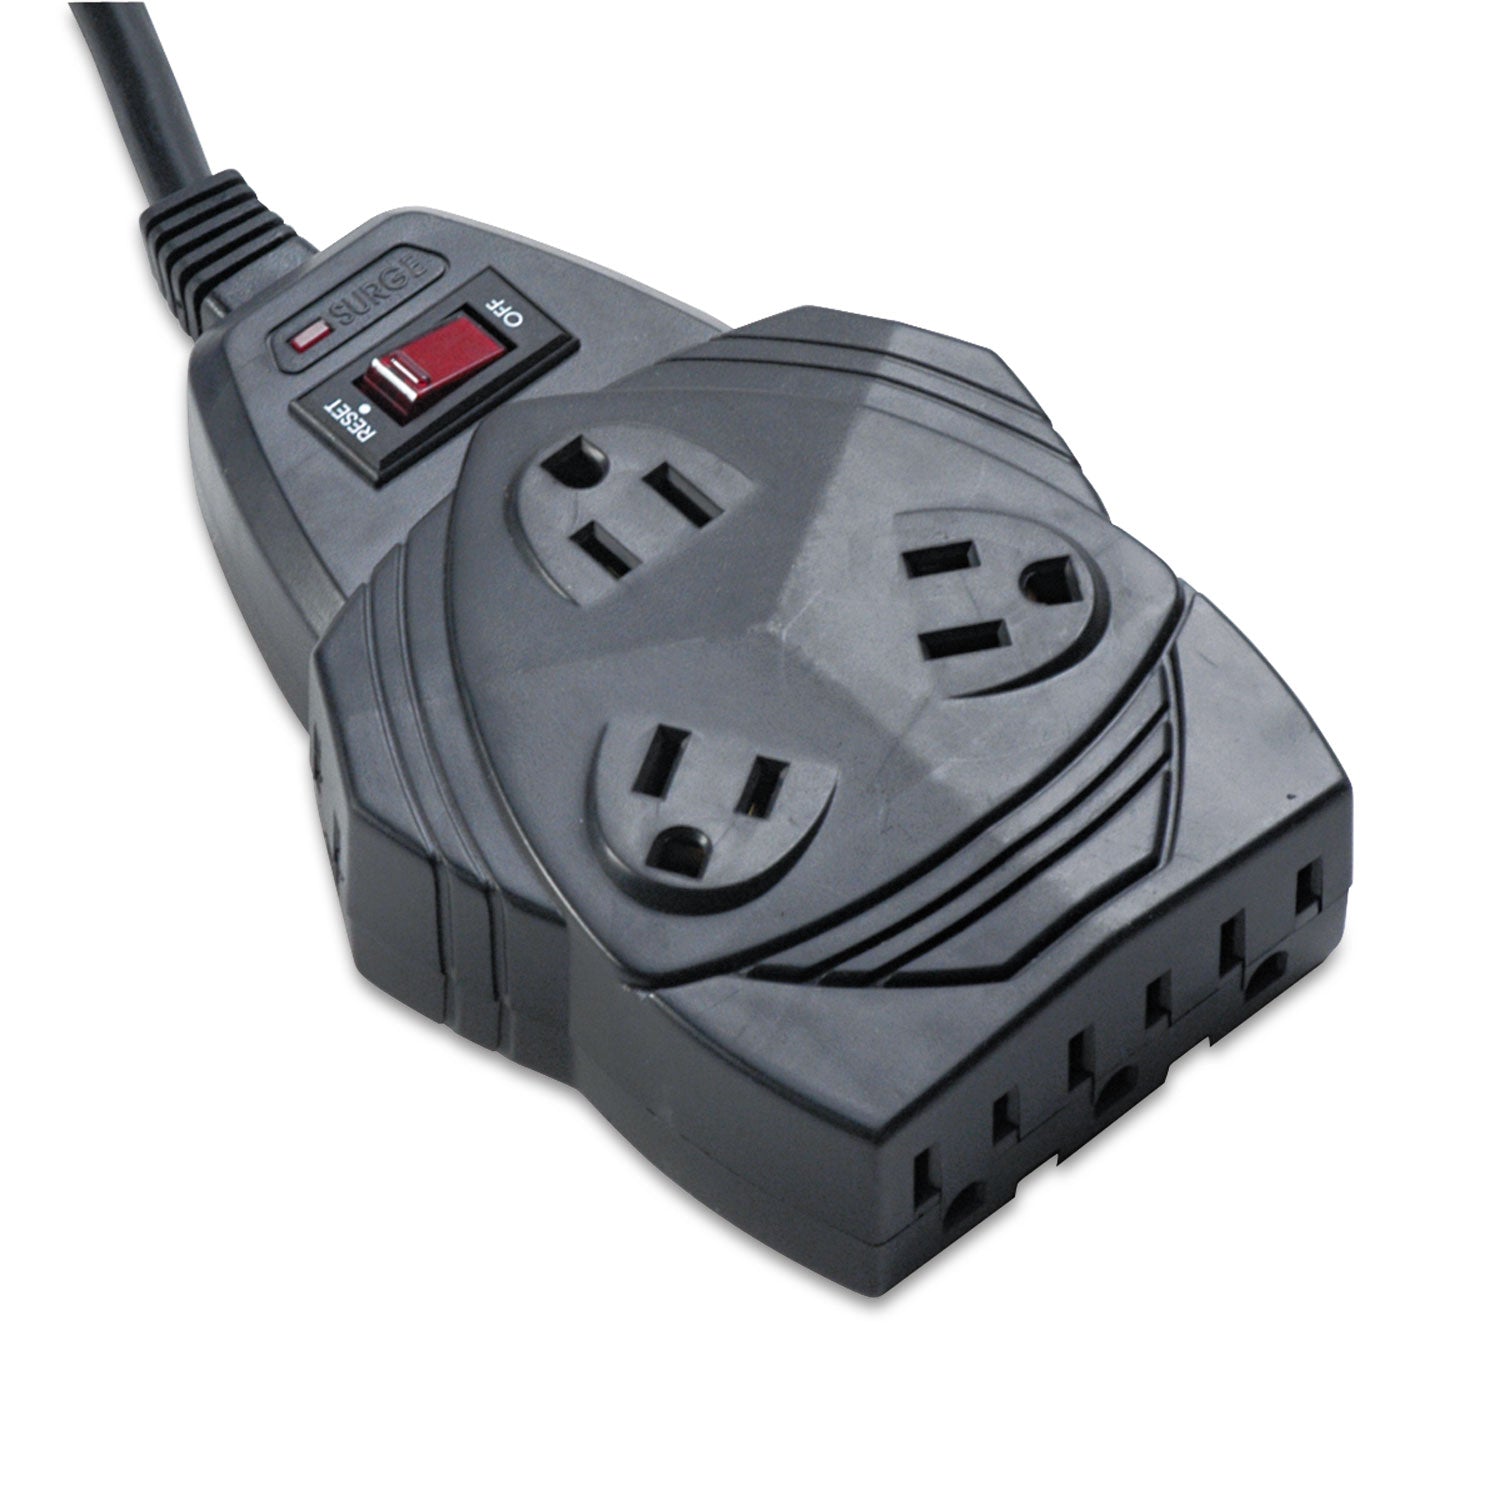 Mighty 8 Surge Protector, 8 AC Outlets, 6 ft Cord, 1,460 J, Black - 